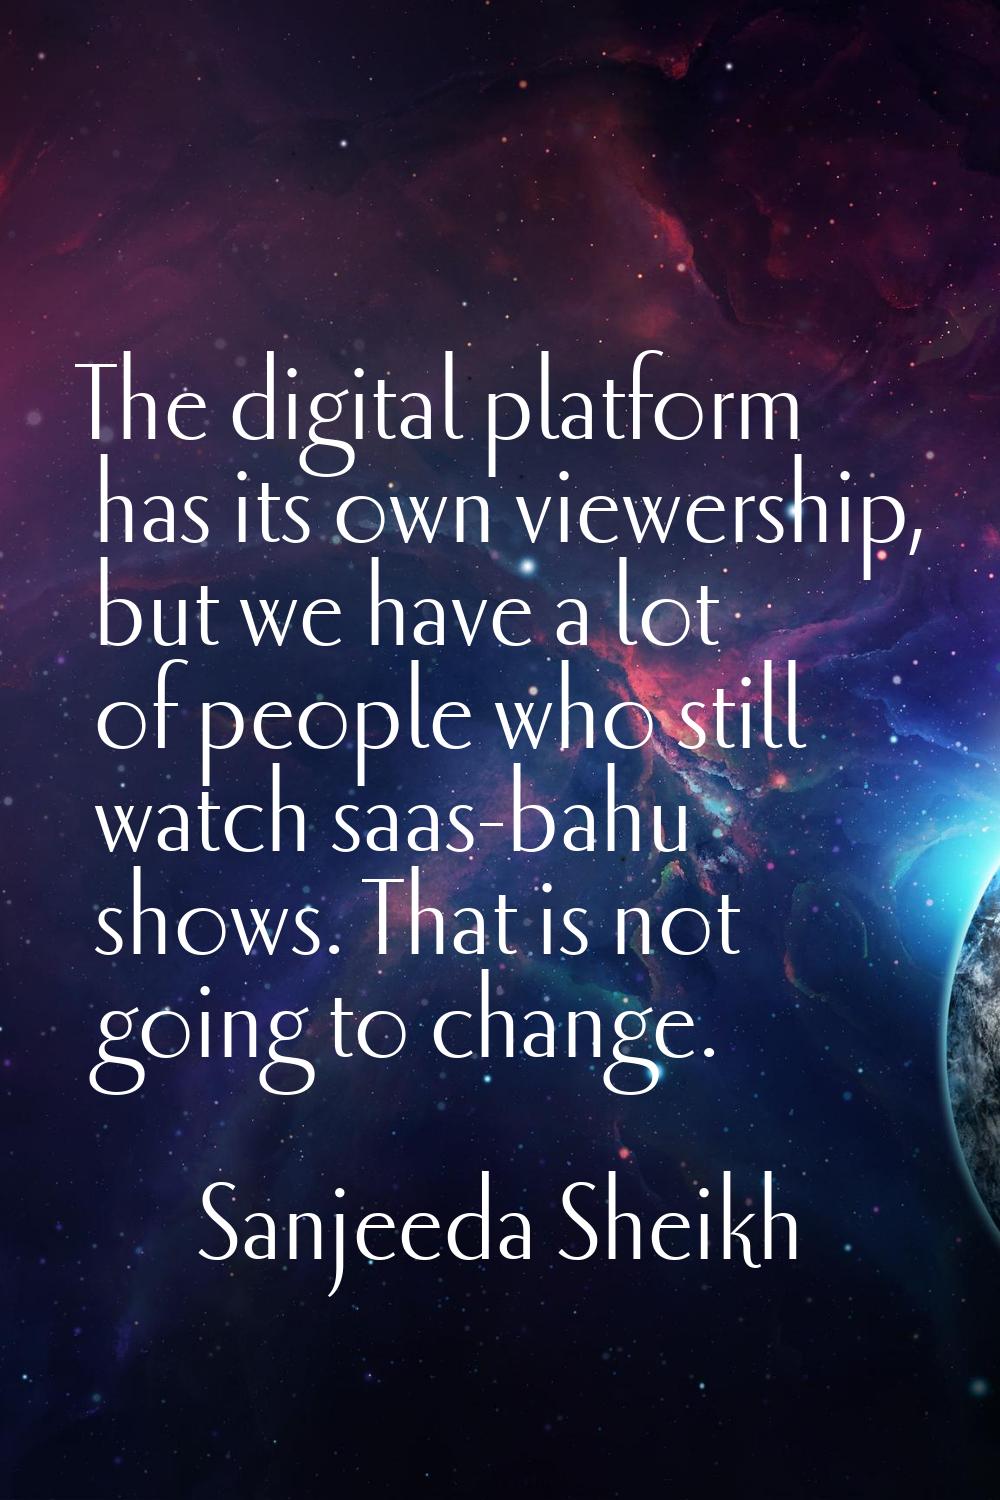 The digital platform has its own viewership, but we have a lot of people who still watch saas-bahu 